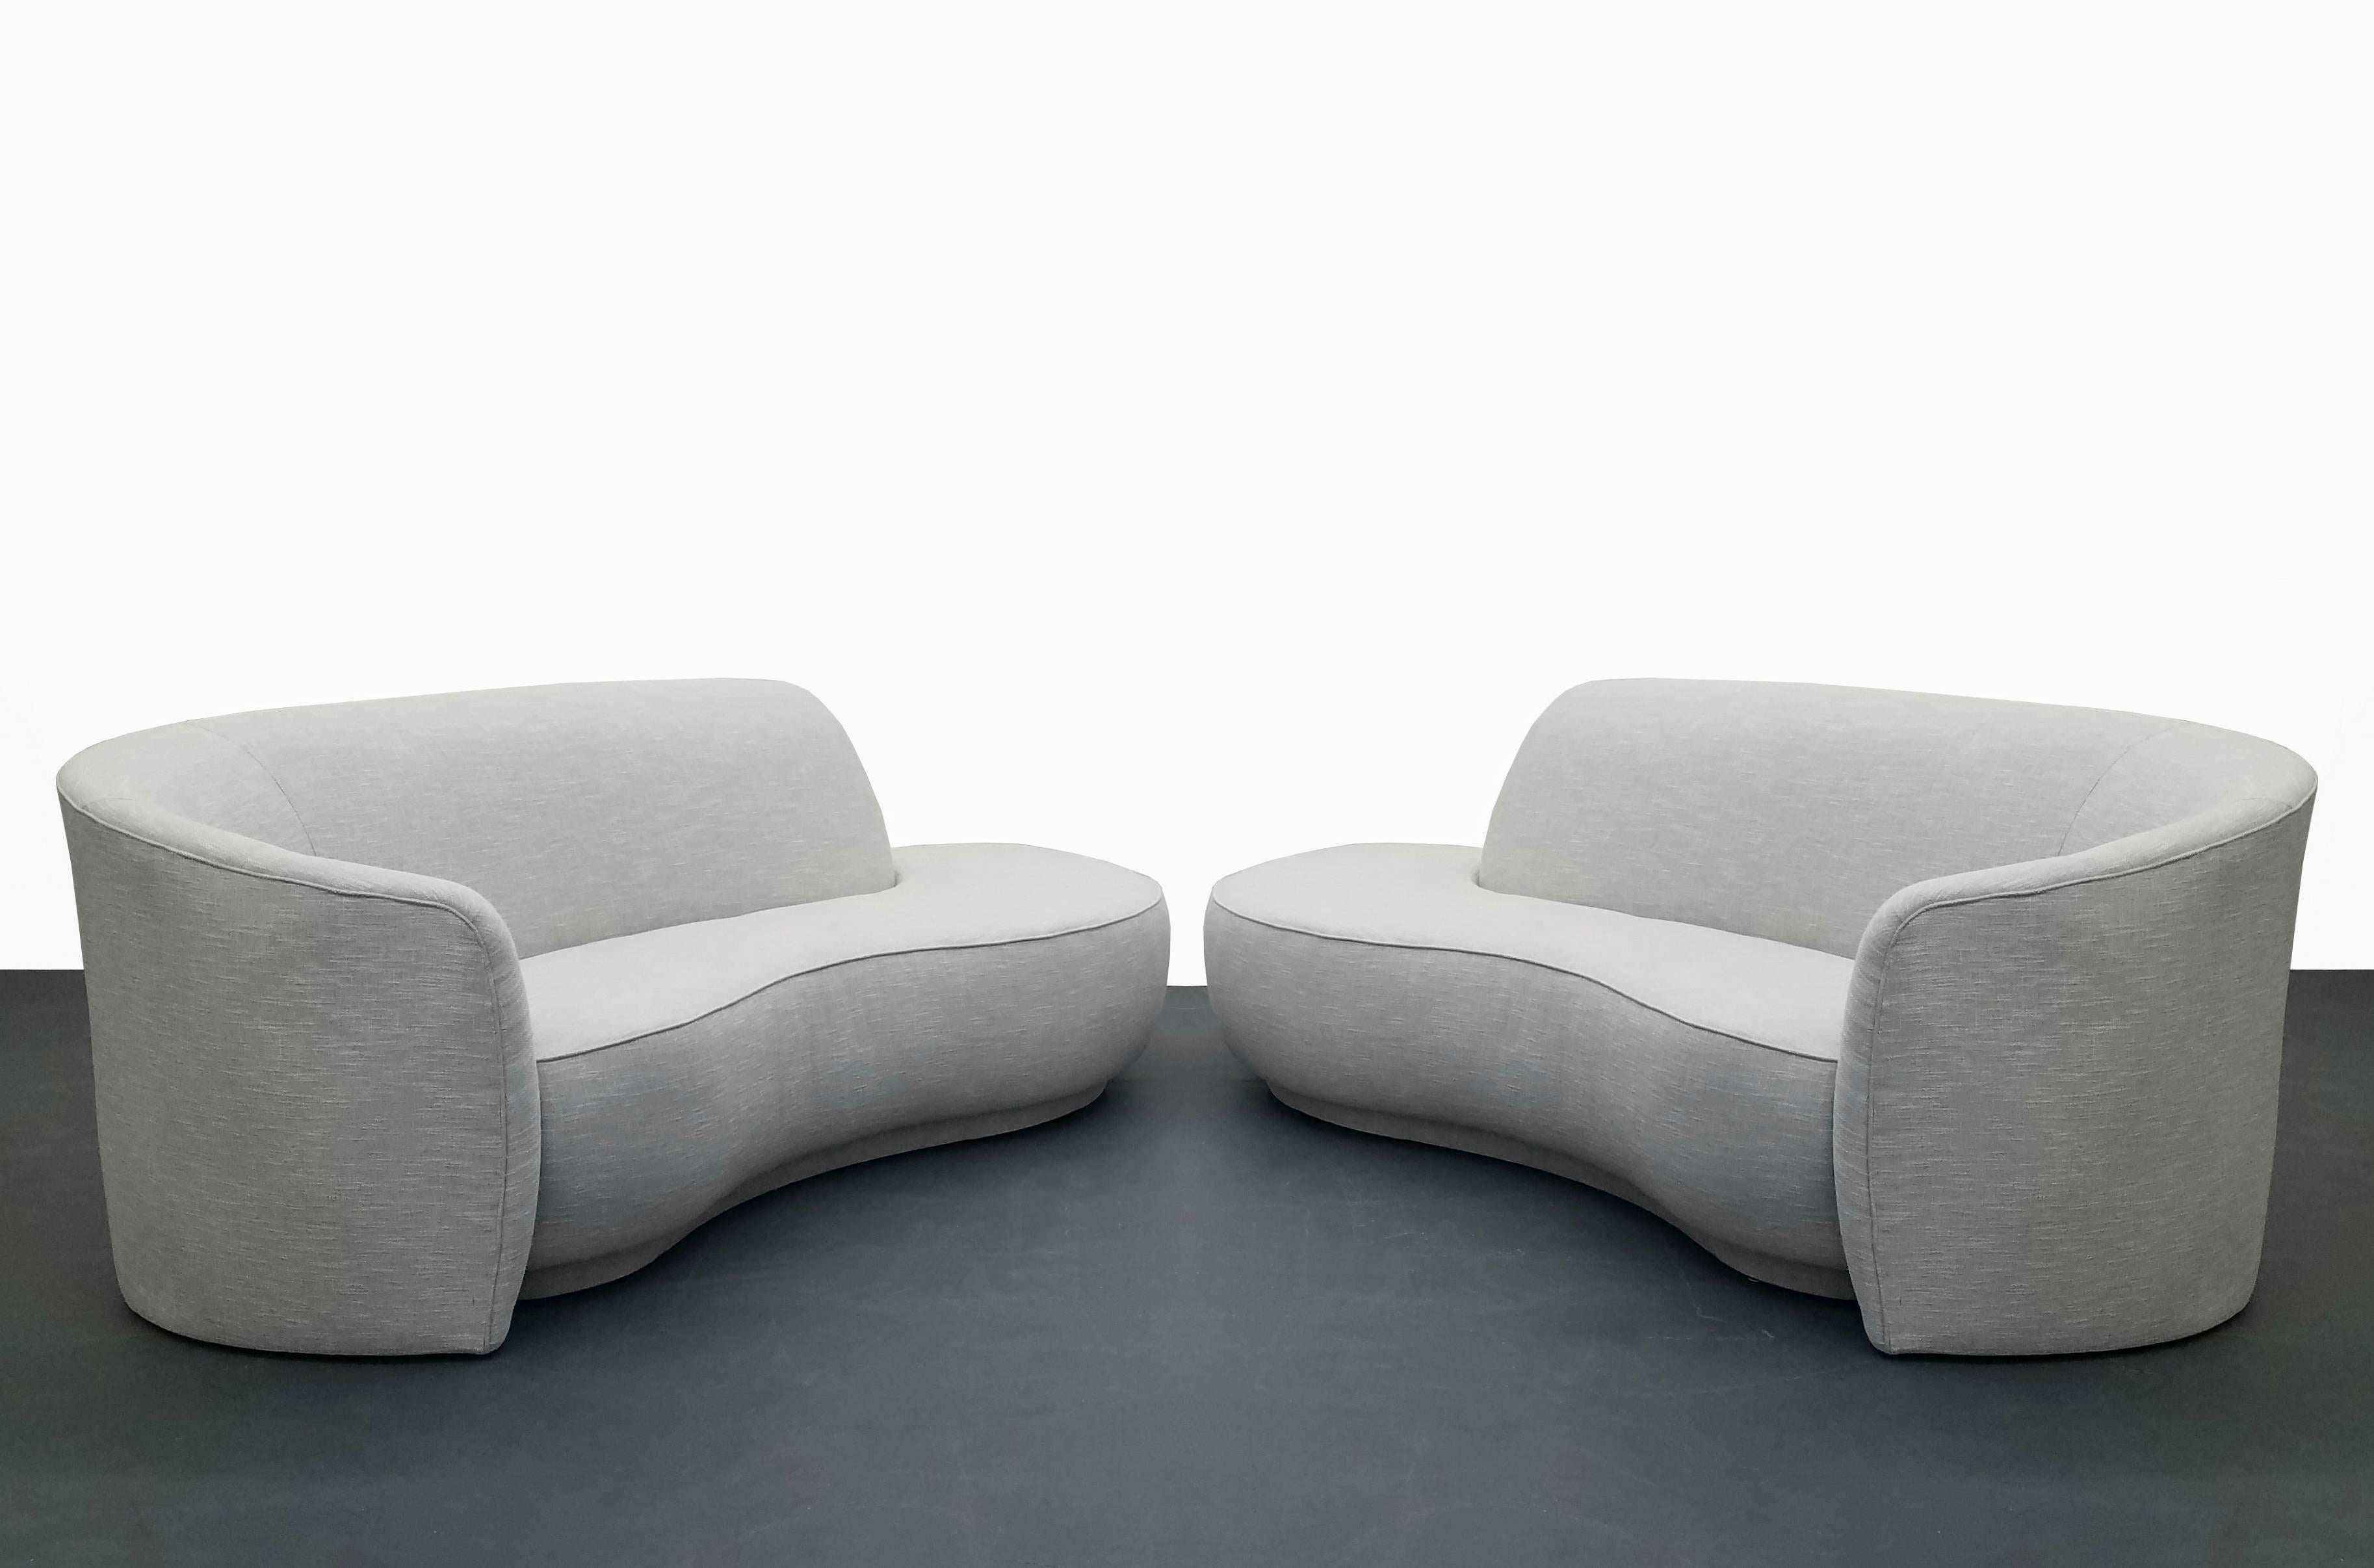 Completely restored pair of serpentine style sofas, style of Vladimir Kagan for Weiman. Been looking for that perfect pair, look no further. Sofas have been dressed in a beautiful neutral off-white colored chunky tweed. They are perfect and ready